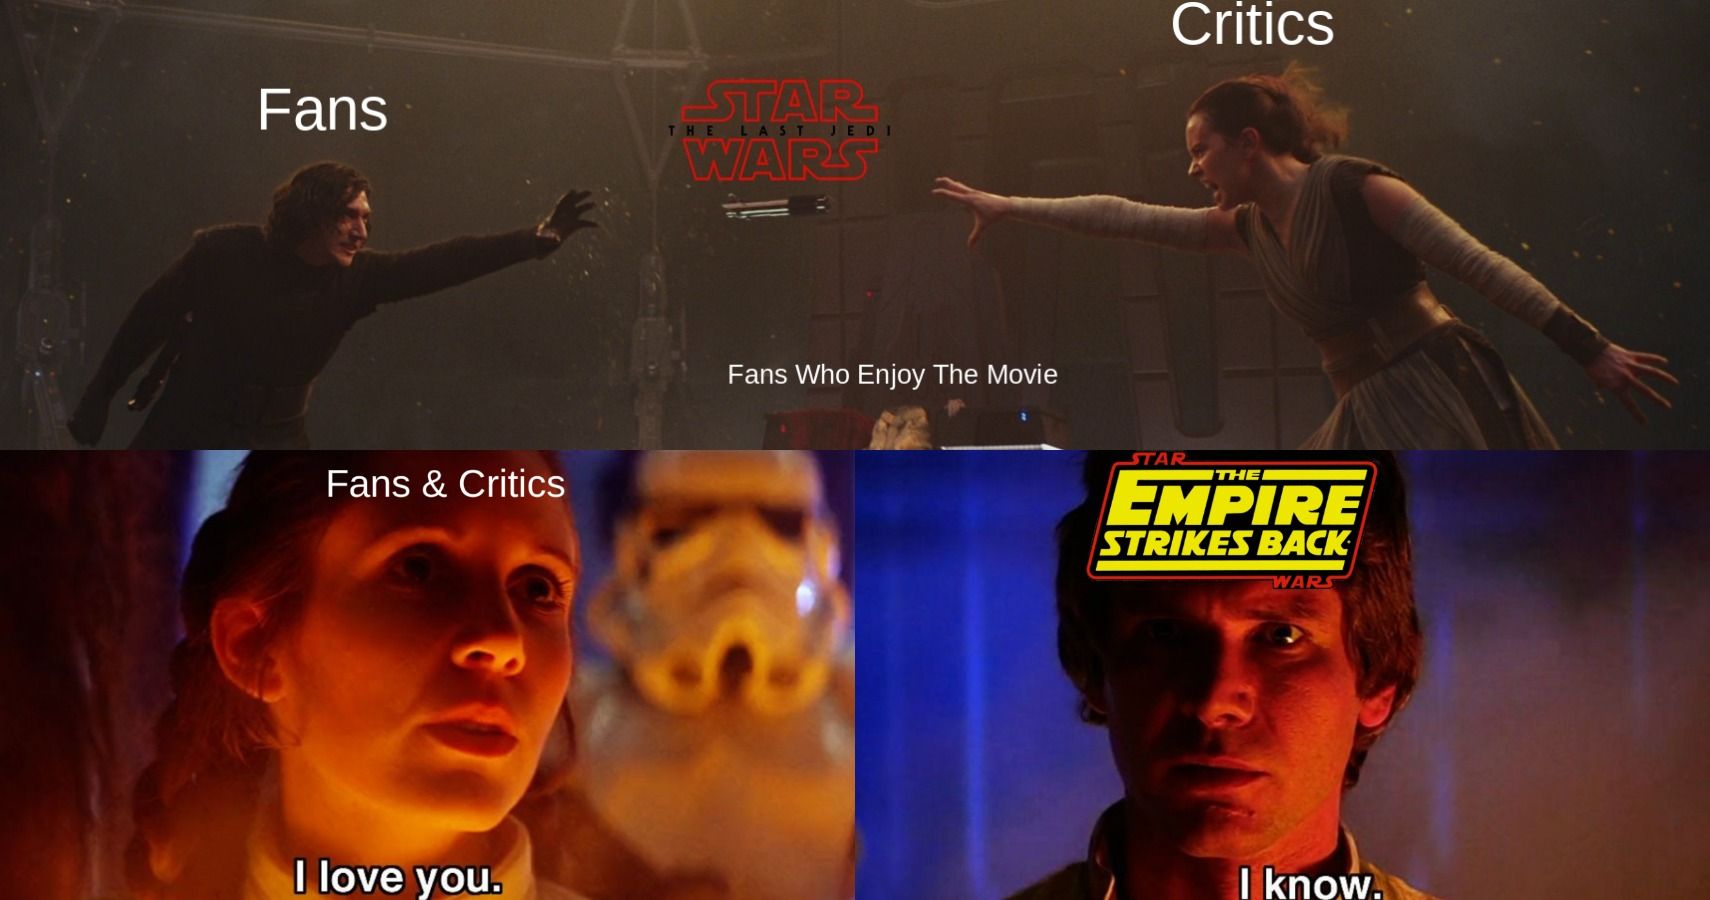 How is the Star Wars series received by fans and critics?